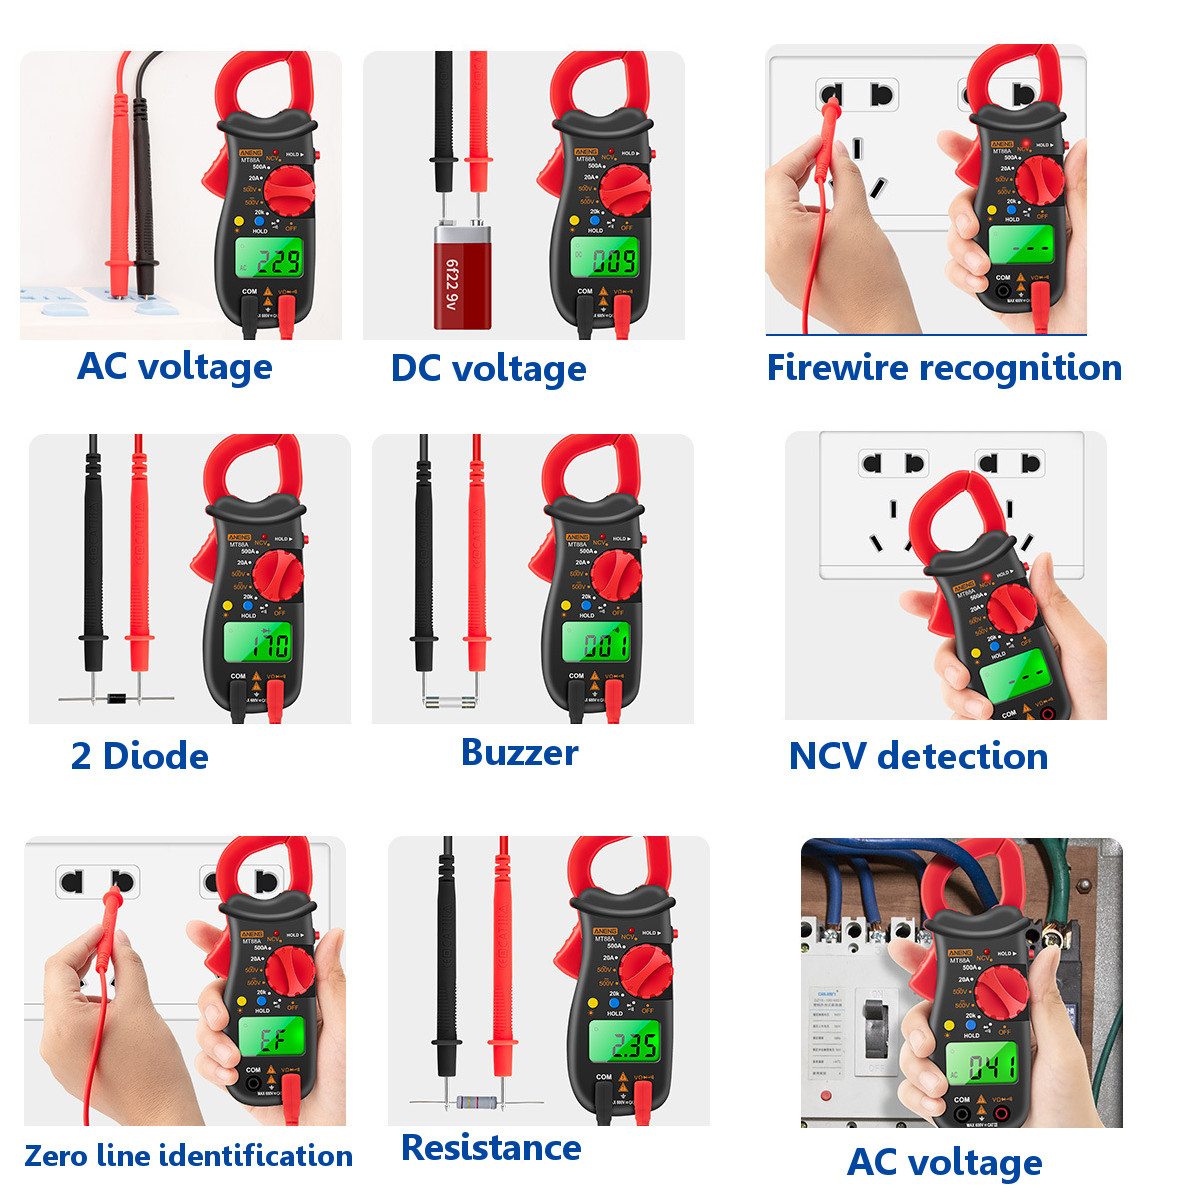 ANENG-MT88A-Digital-Clamp-Meter-Multimeter-DCAC-Voltage-AC-Current-Tester-Frequency-Capacitance-NCV--1751874-6